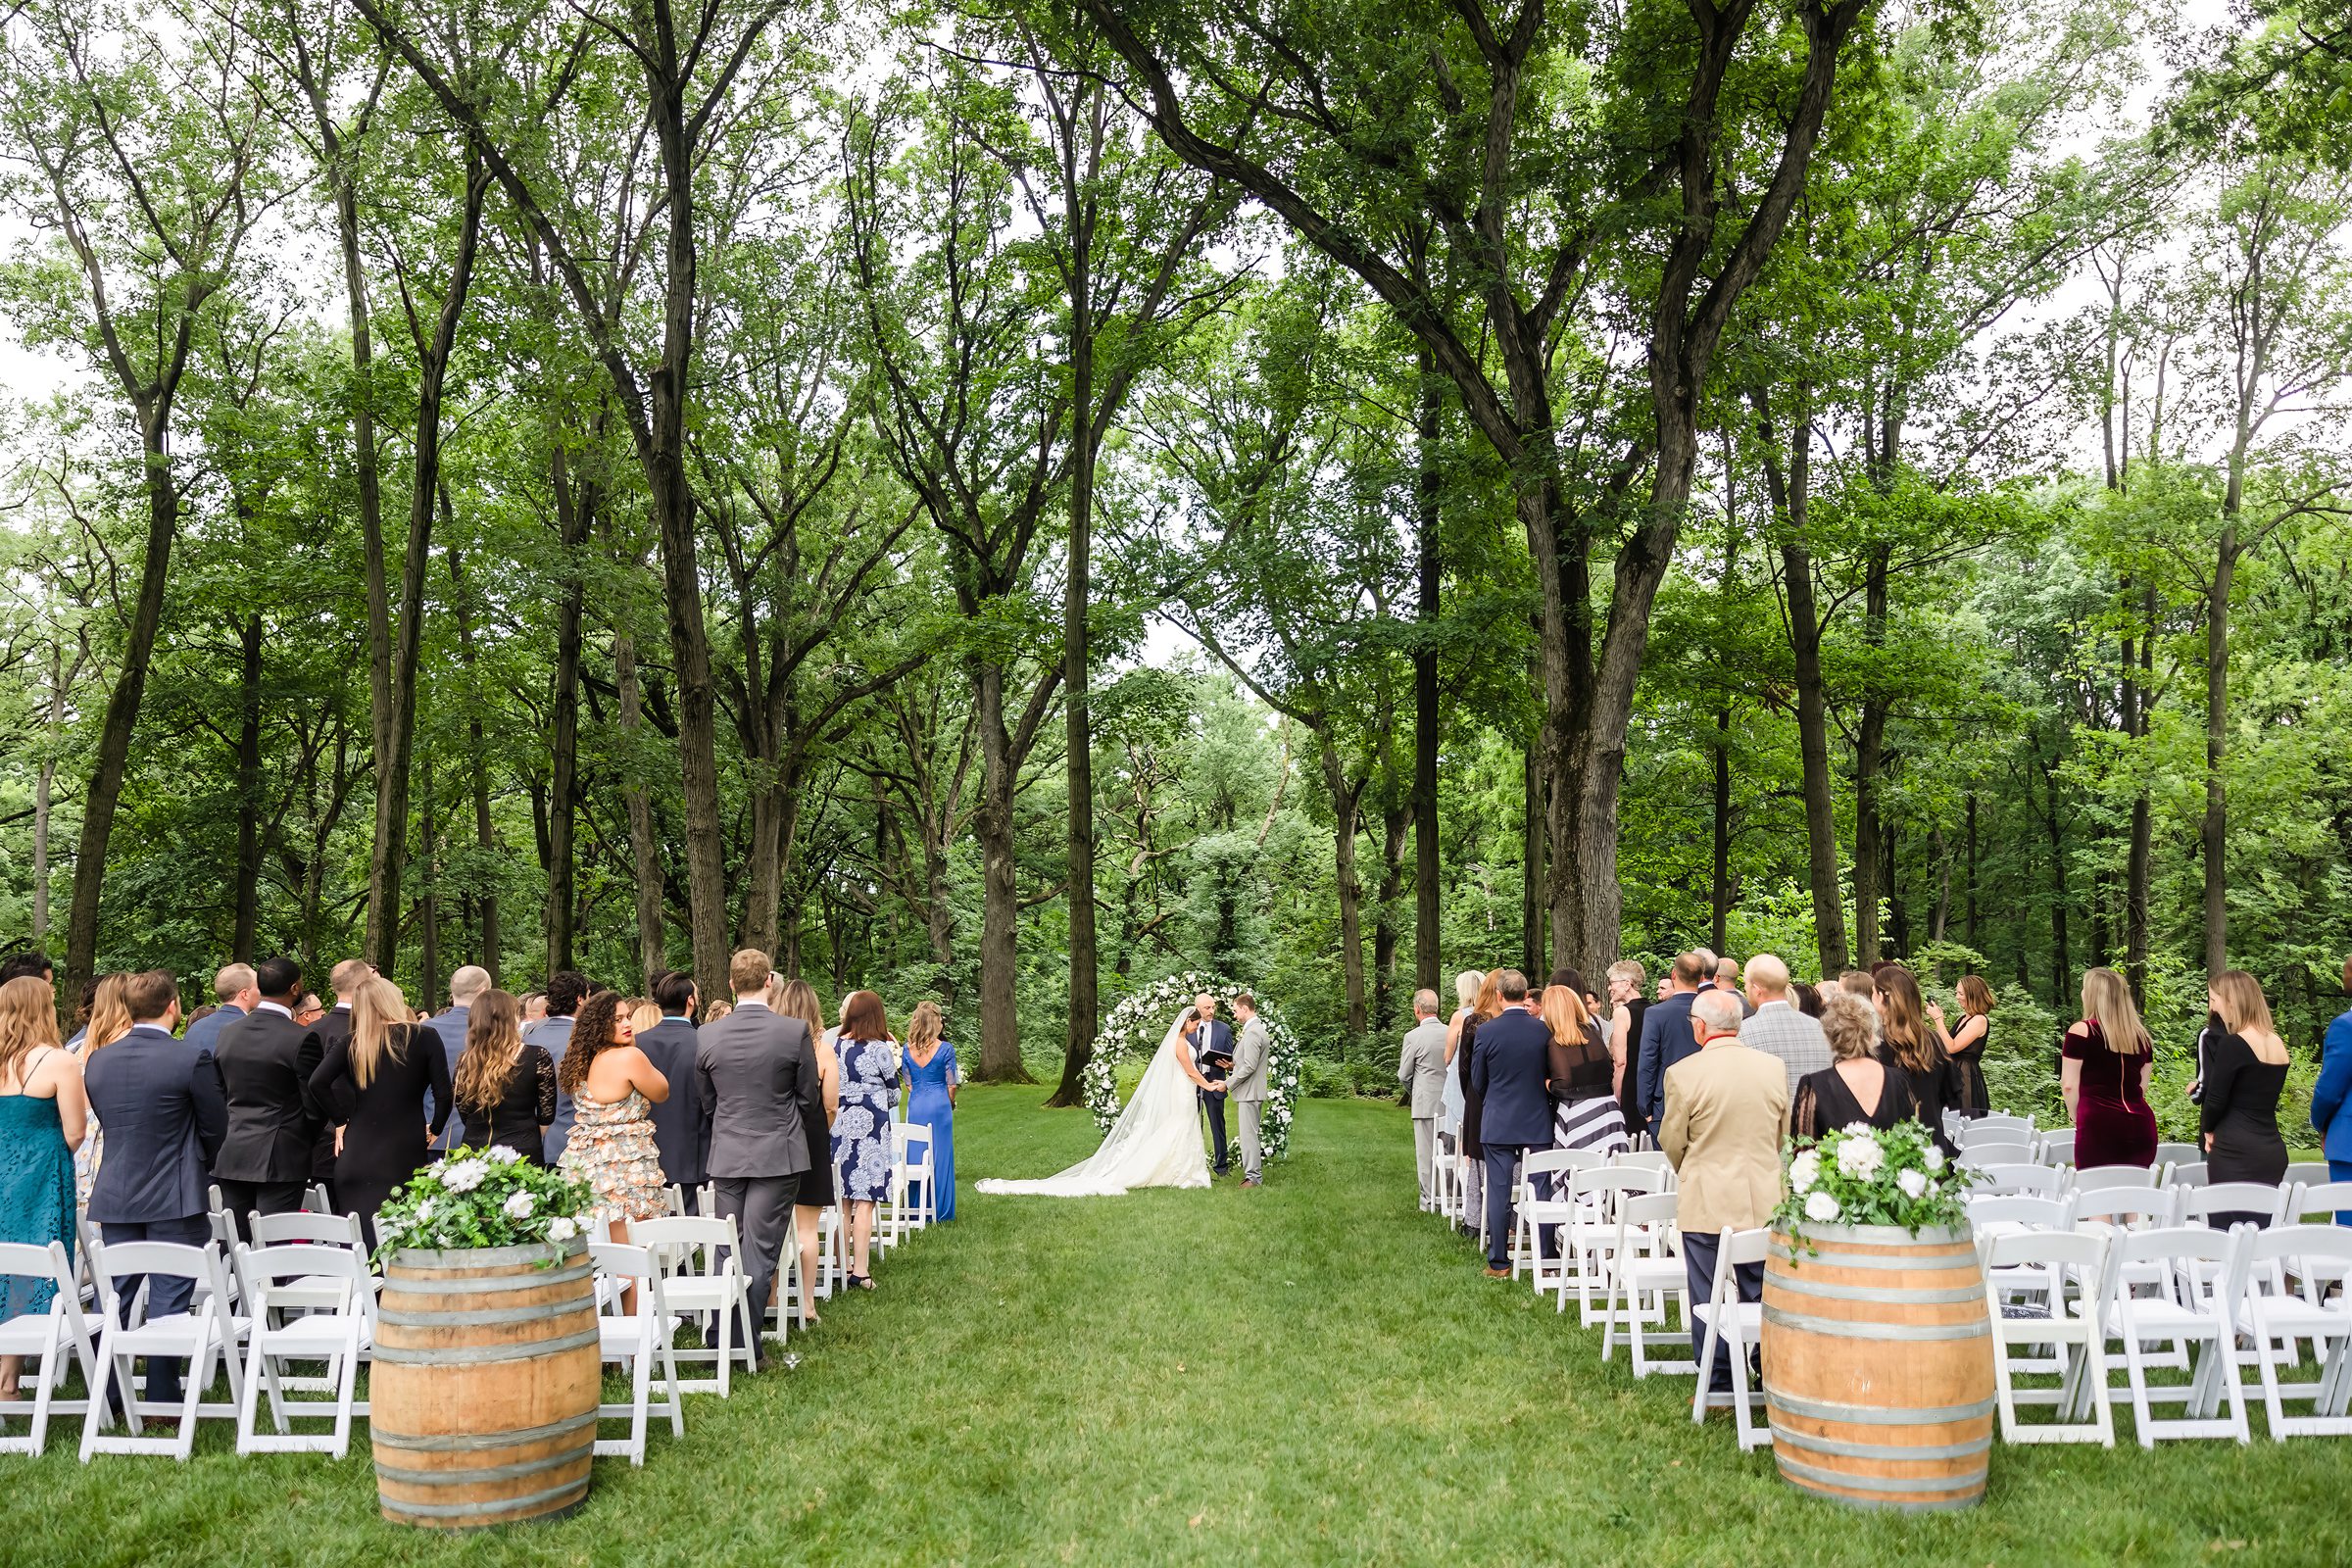 Friends and family look on during a wedding ceremony at the Monte Bello Estate in Lemont, Illinois